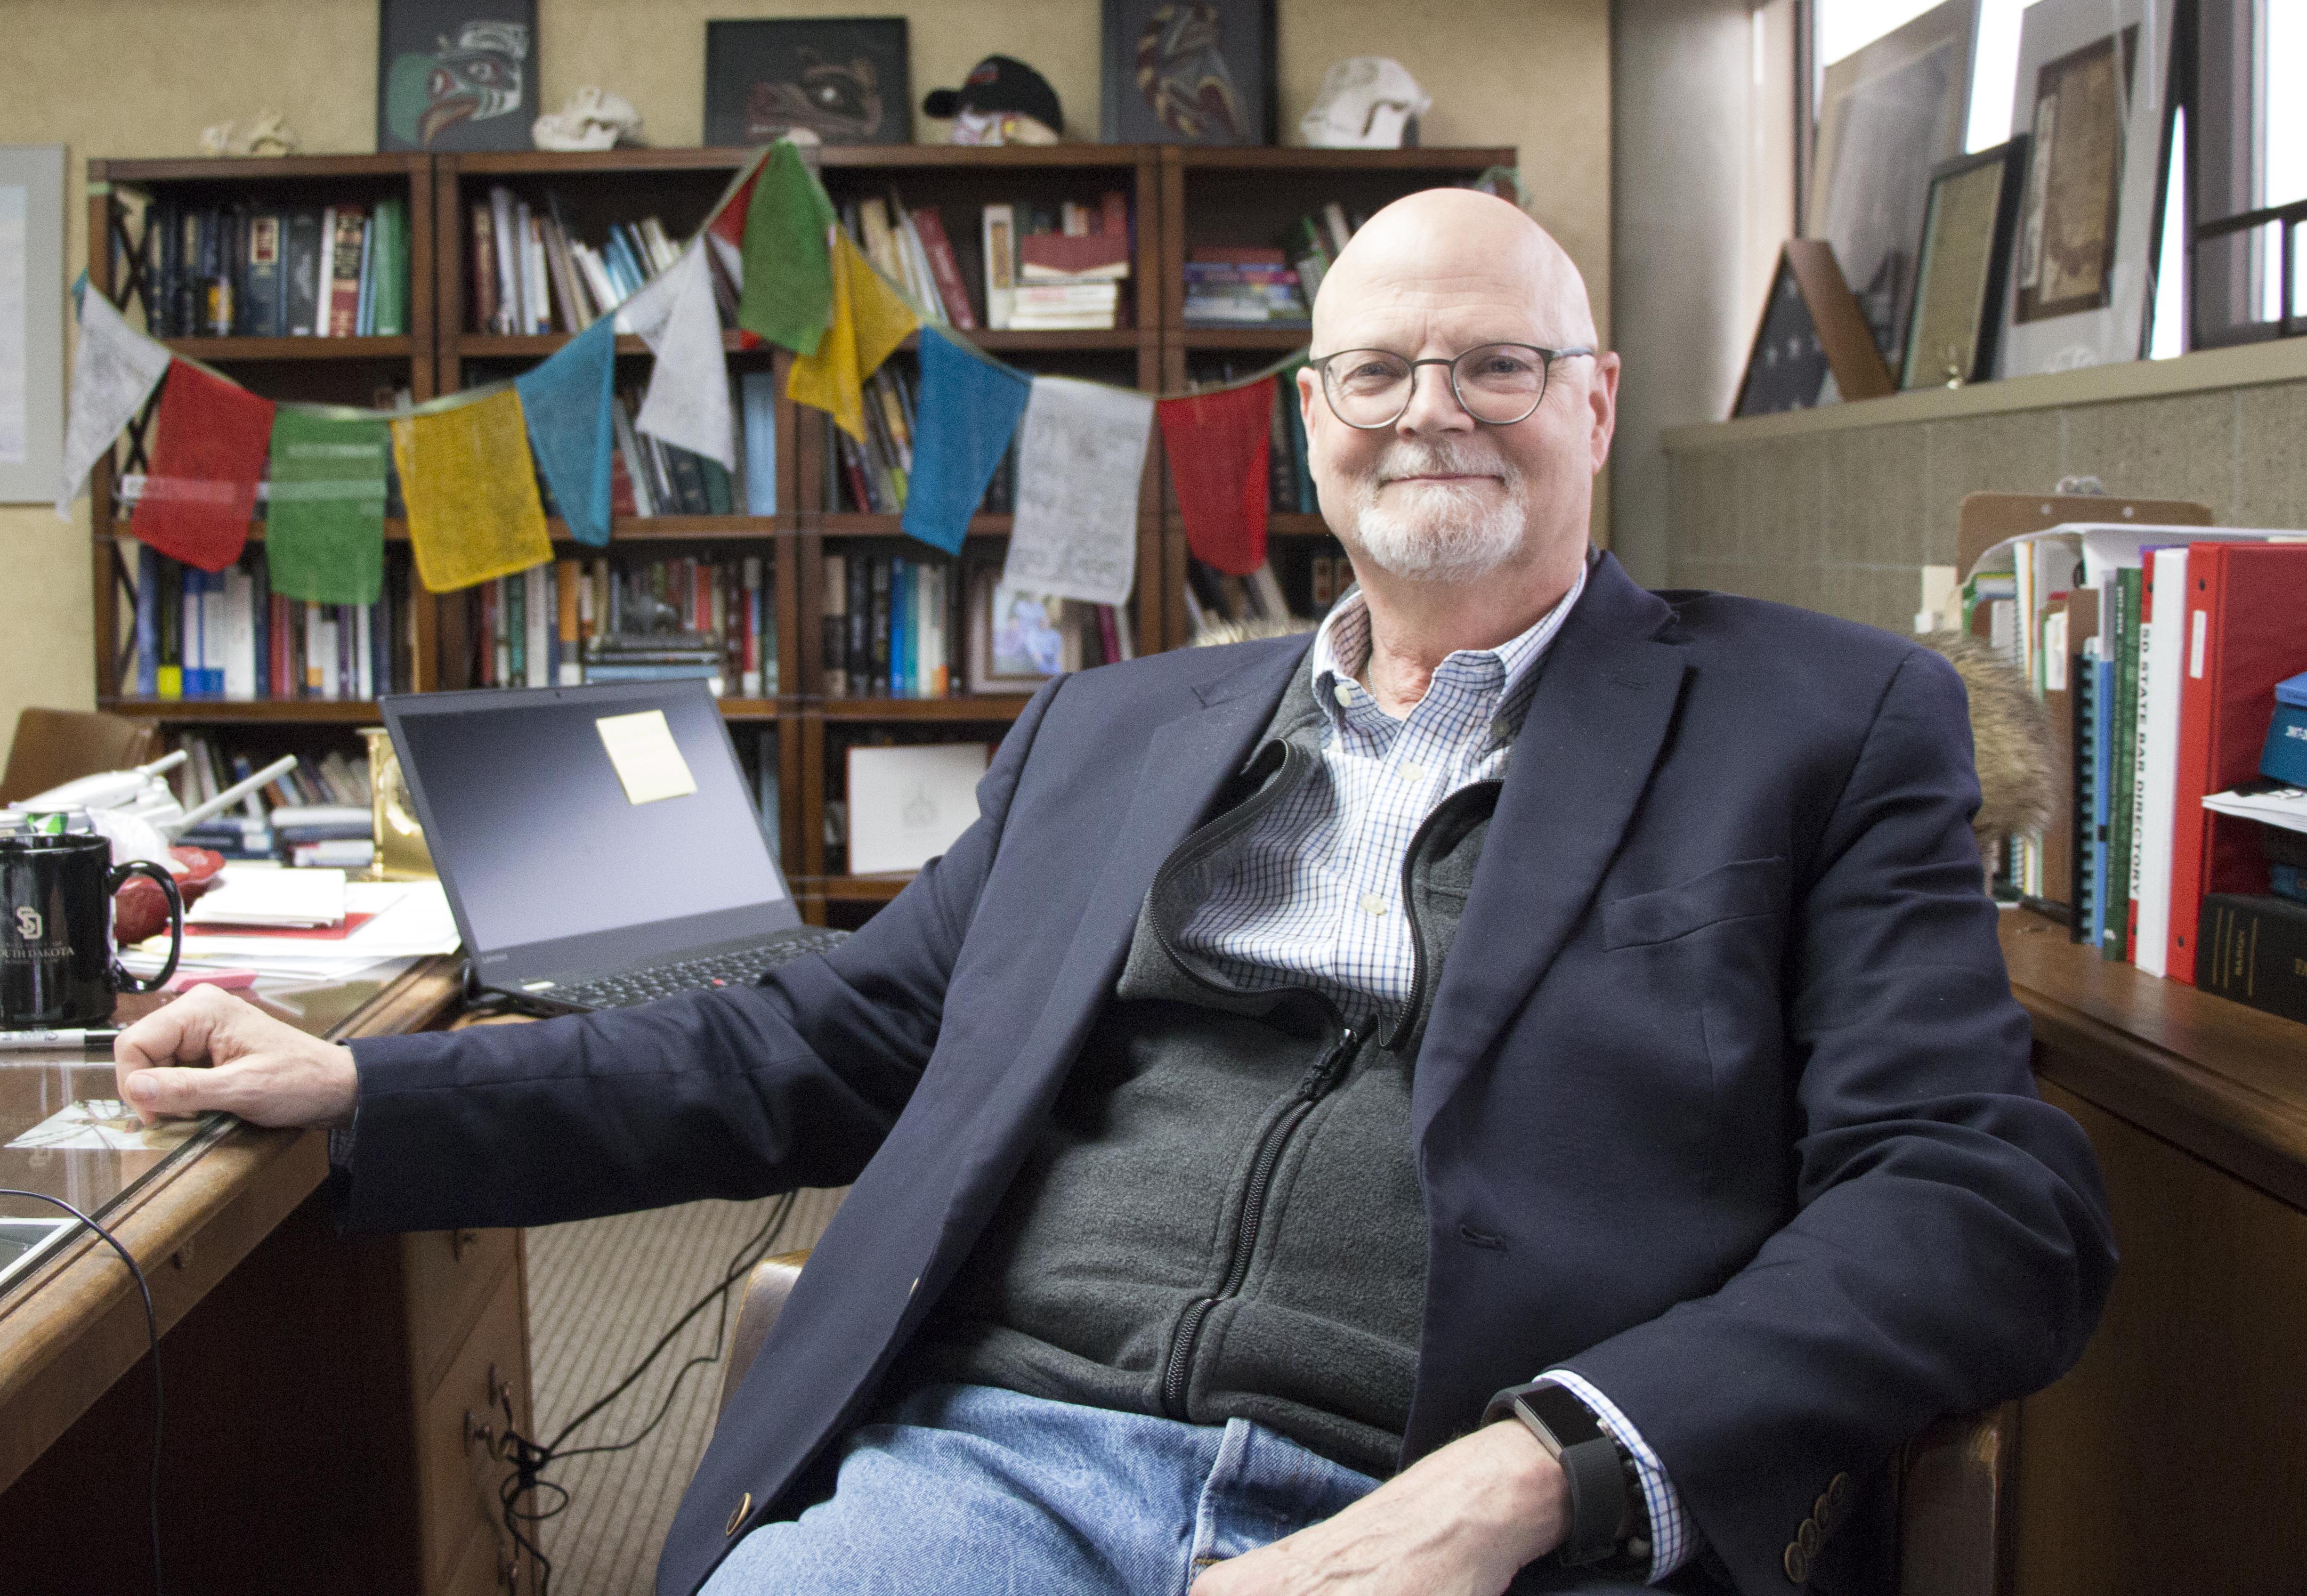 Law school dean looks back at a ‘magnificent challenge’